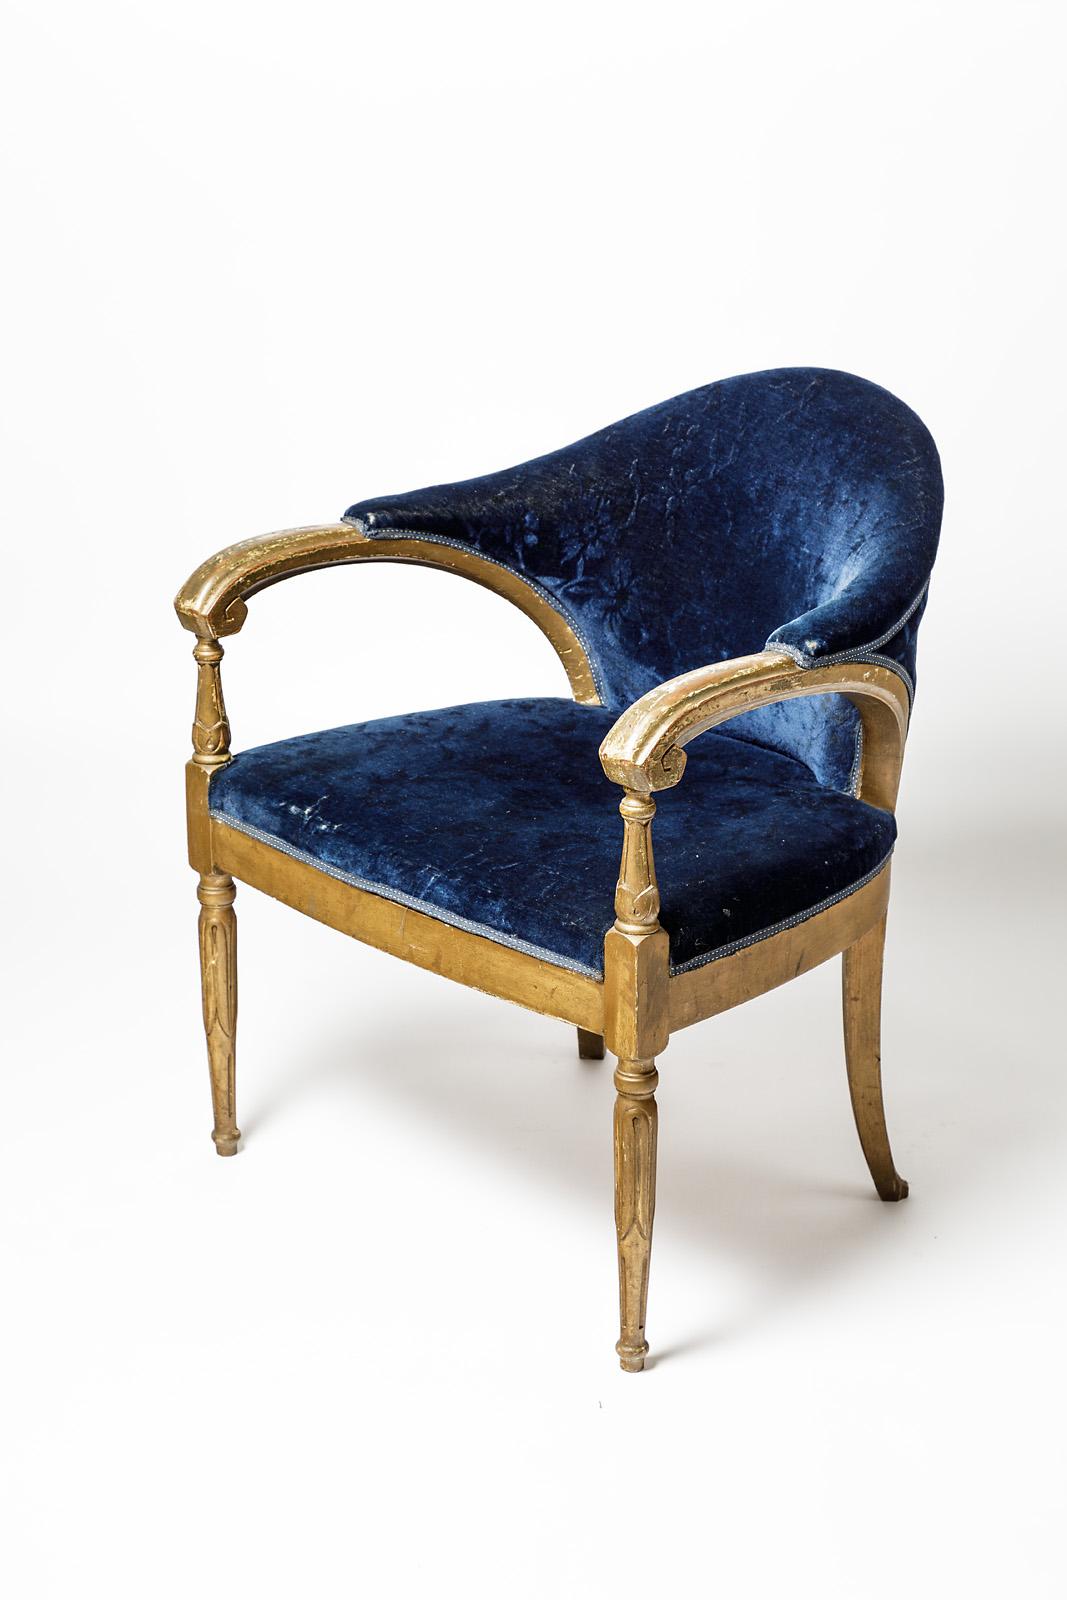 Very important desk chair, circa 1930.

Elegant desk chair with wood and beautiful original blue fabric.

Original good condition, some little cracks.

In the style of Léon Jallot ..

Dimensions: 80 x 67 x 50cm.